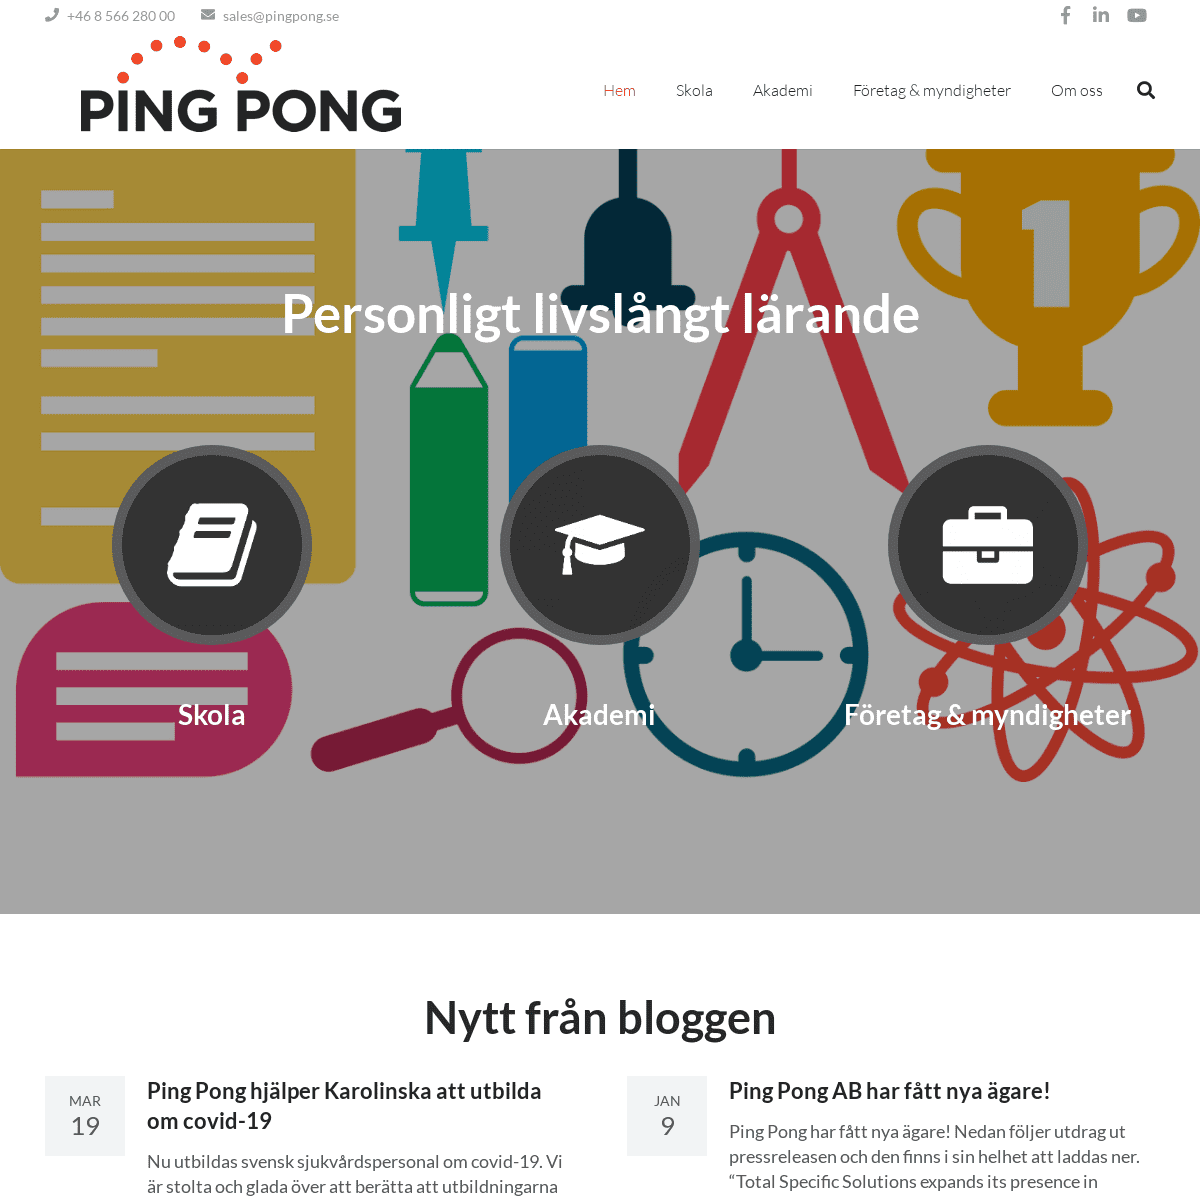 A complete backup of pingpong.se